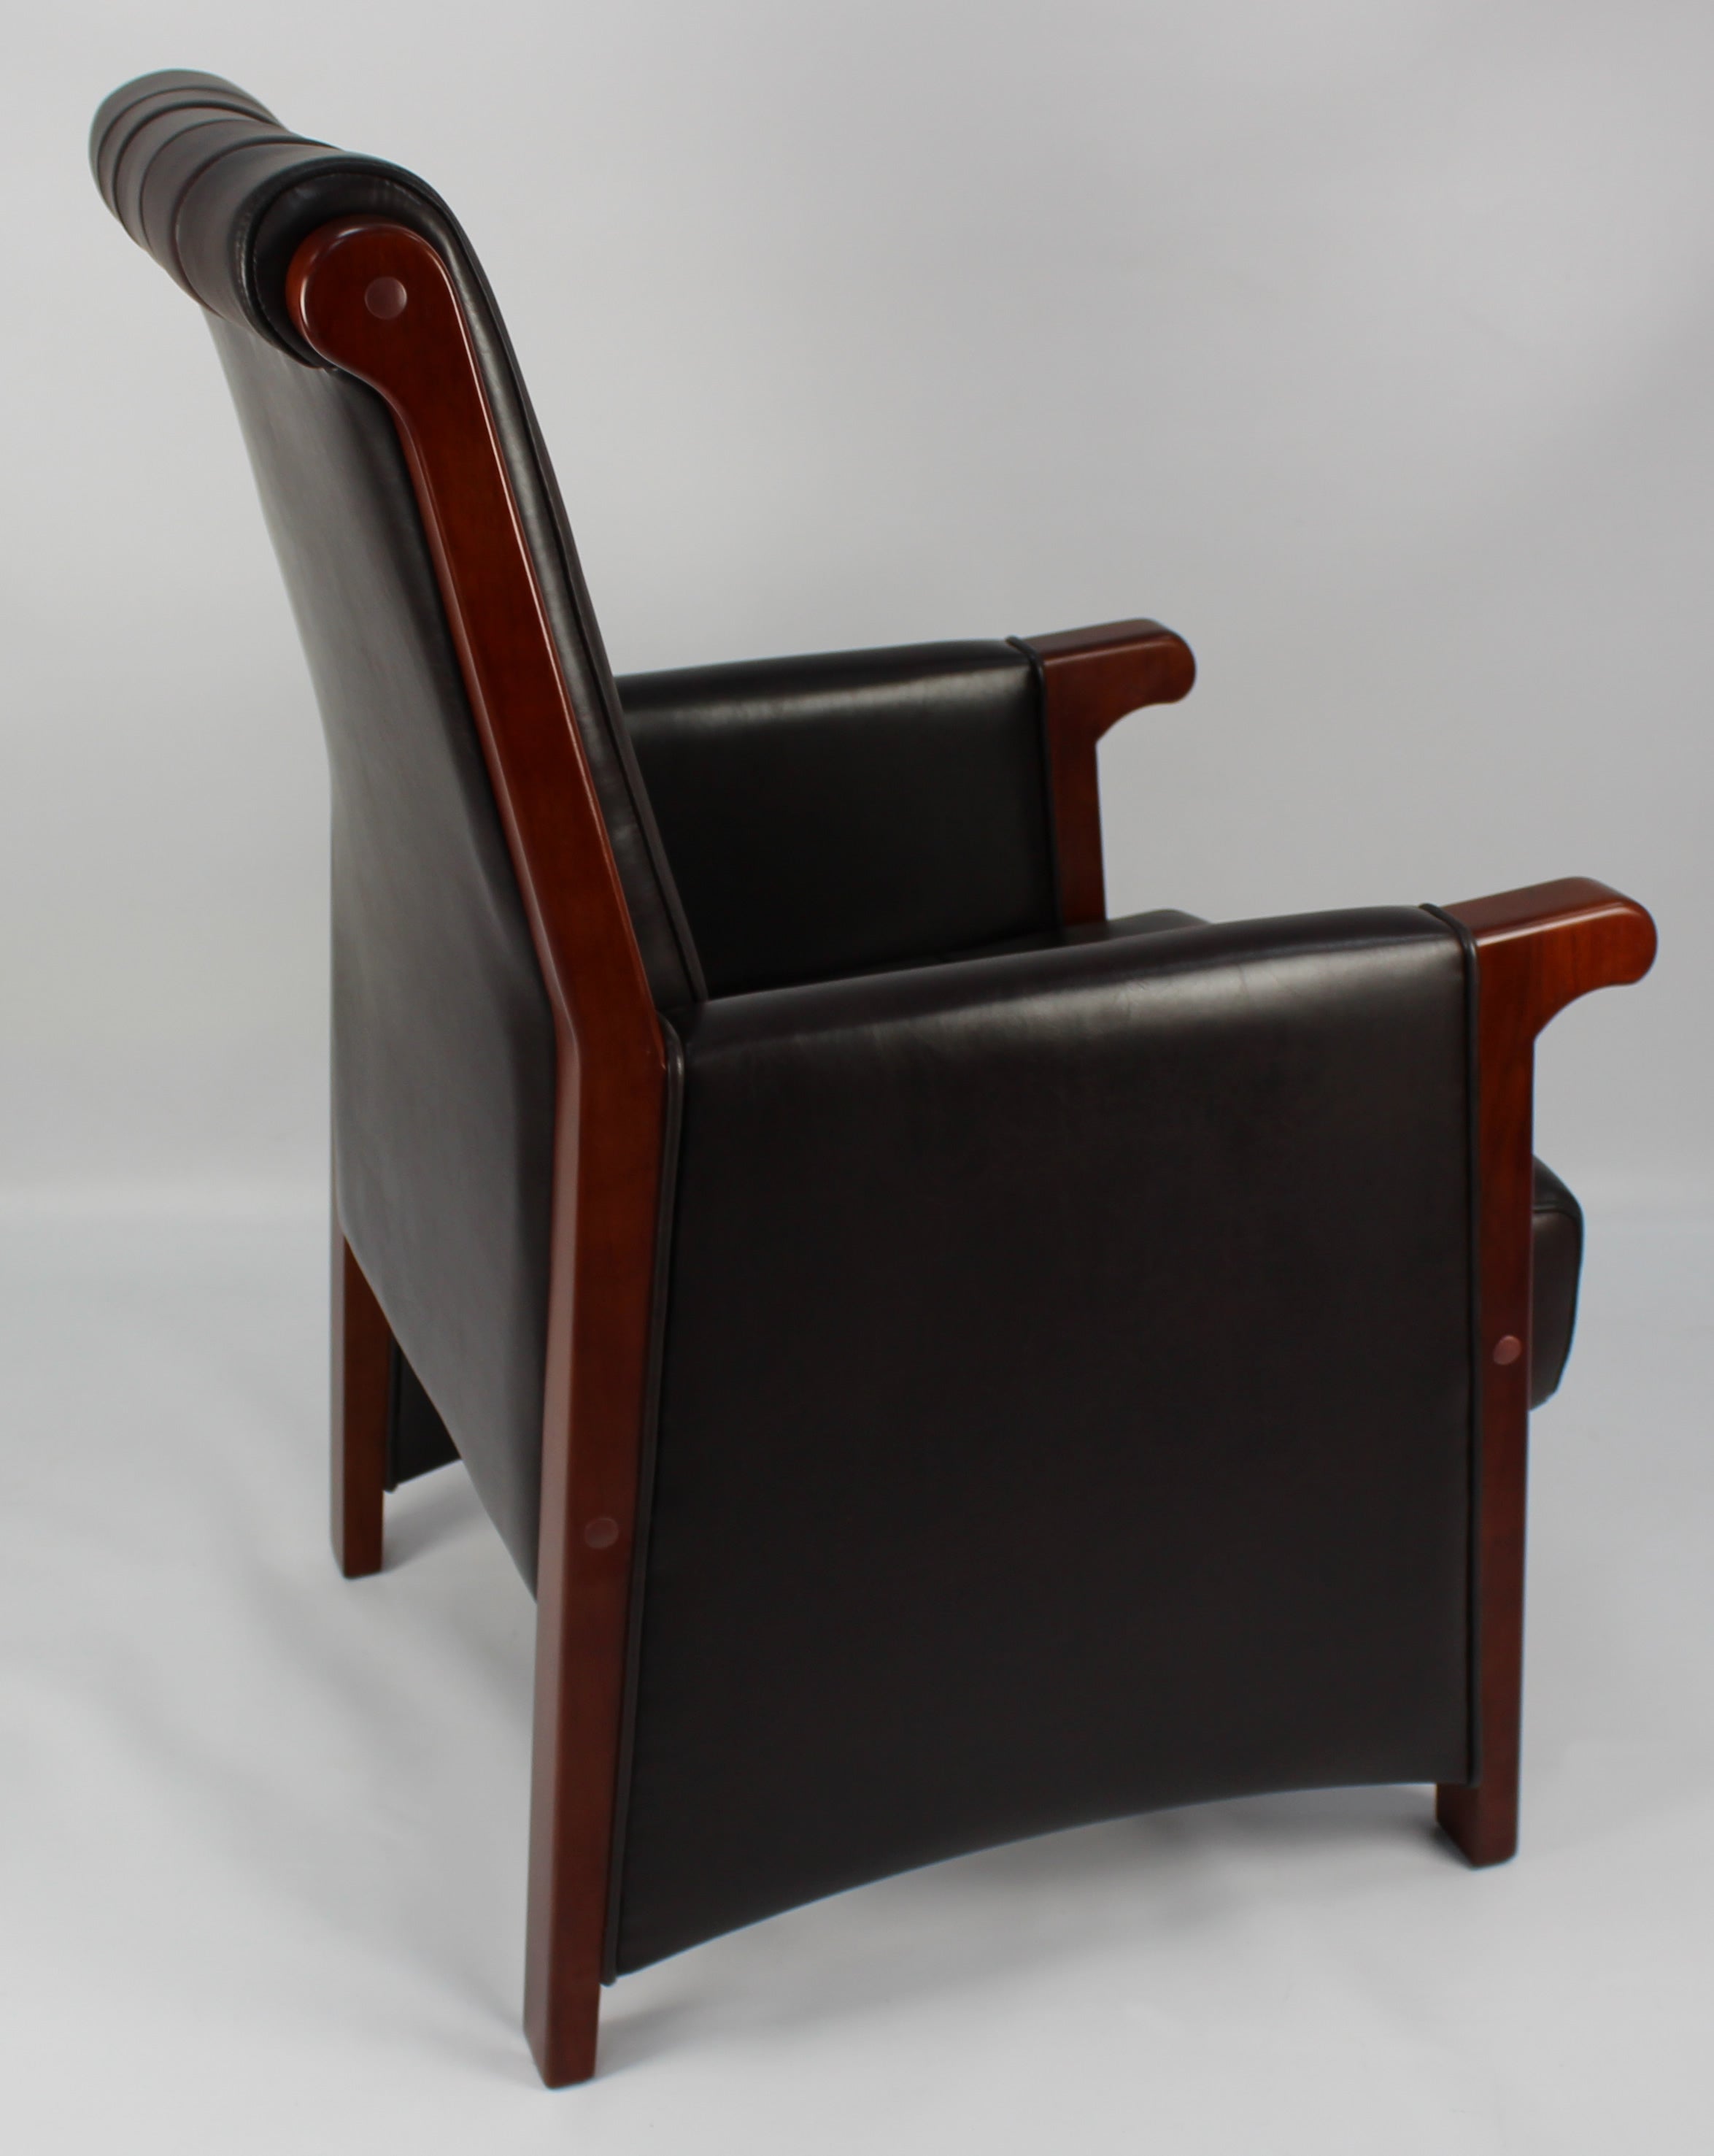 Executive Brown Leather Meeting Chair with Wooden Frame - M004